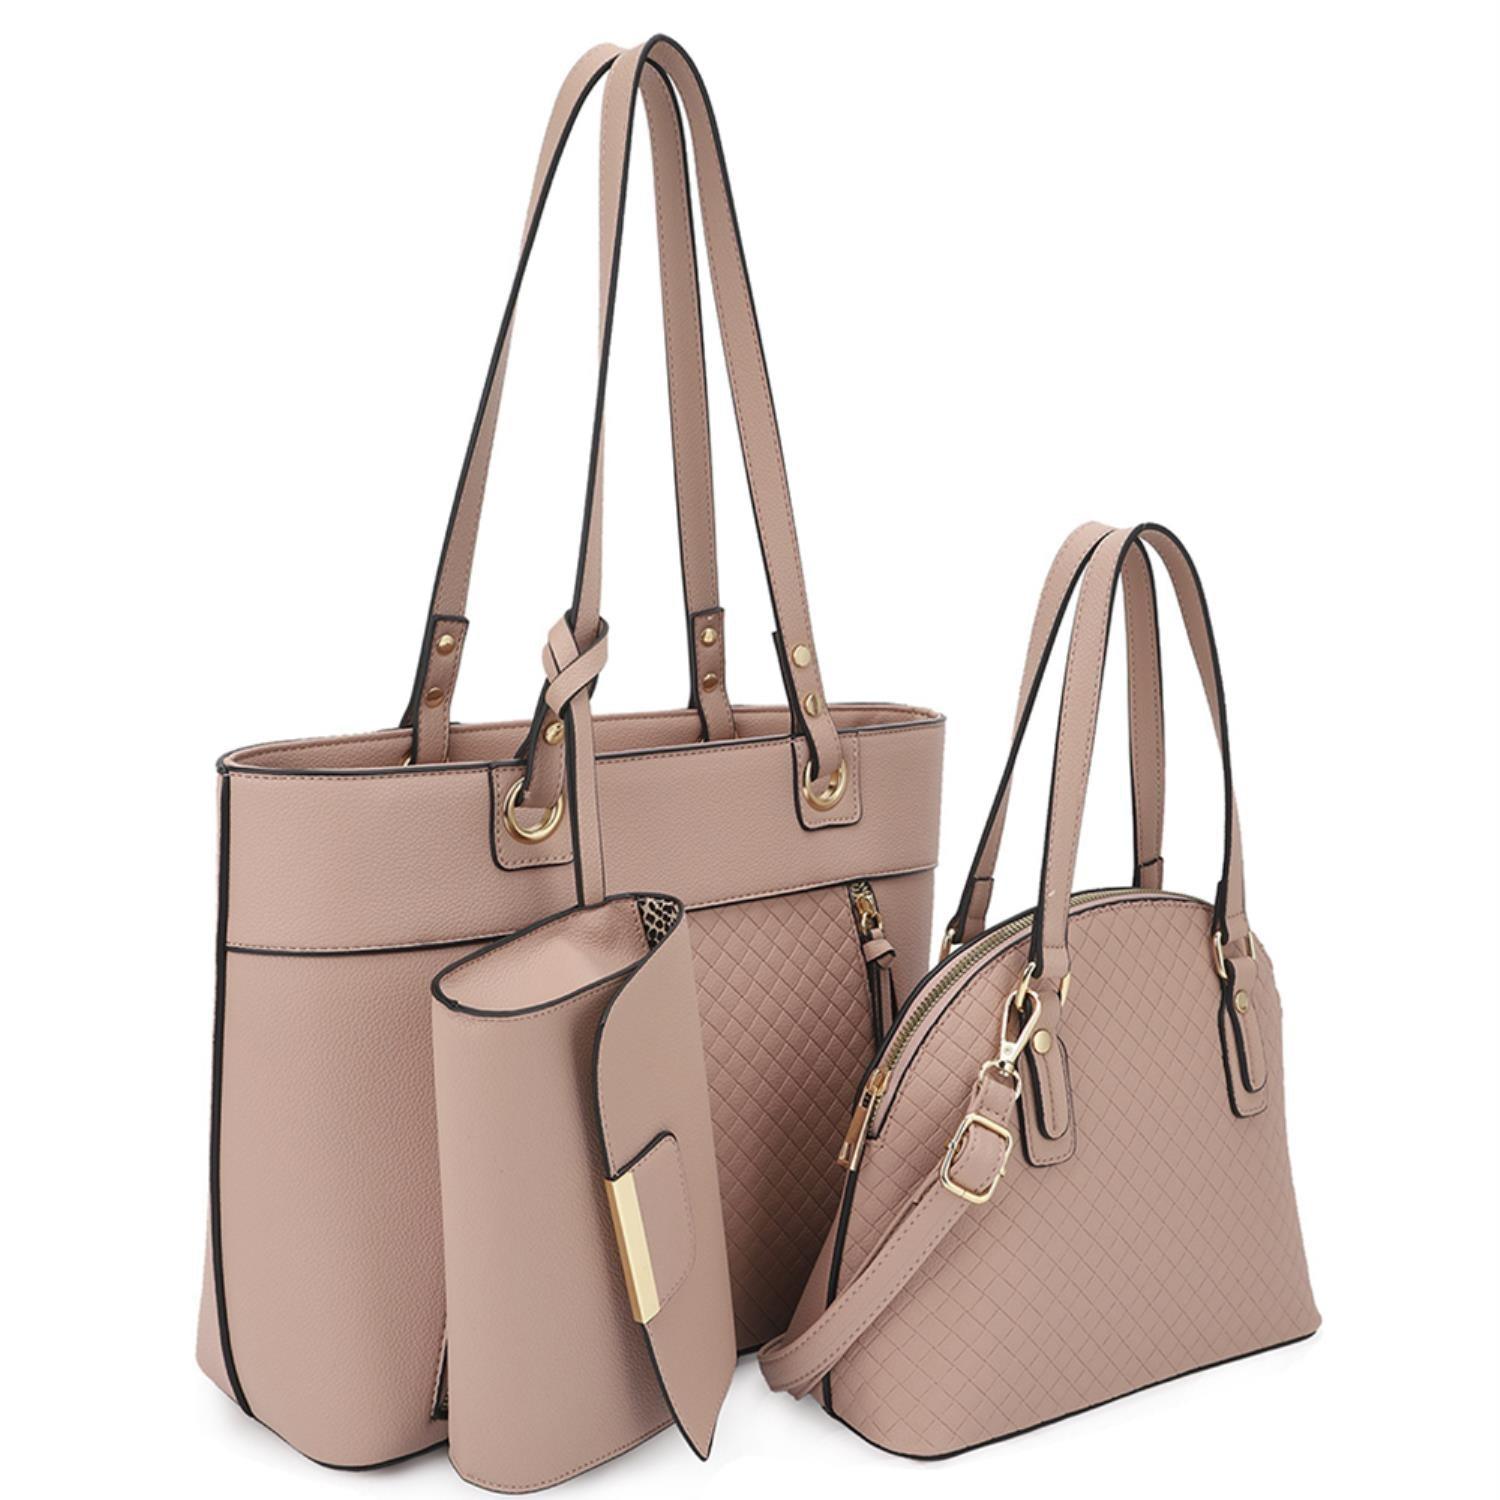 3in1 Smooth Texture Pattern Tote Bag With Handle Bag And Clutch Set - SAVLUXE